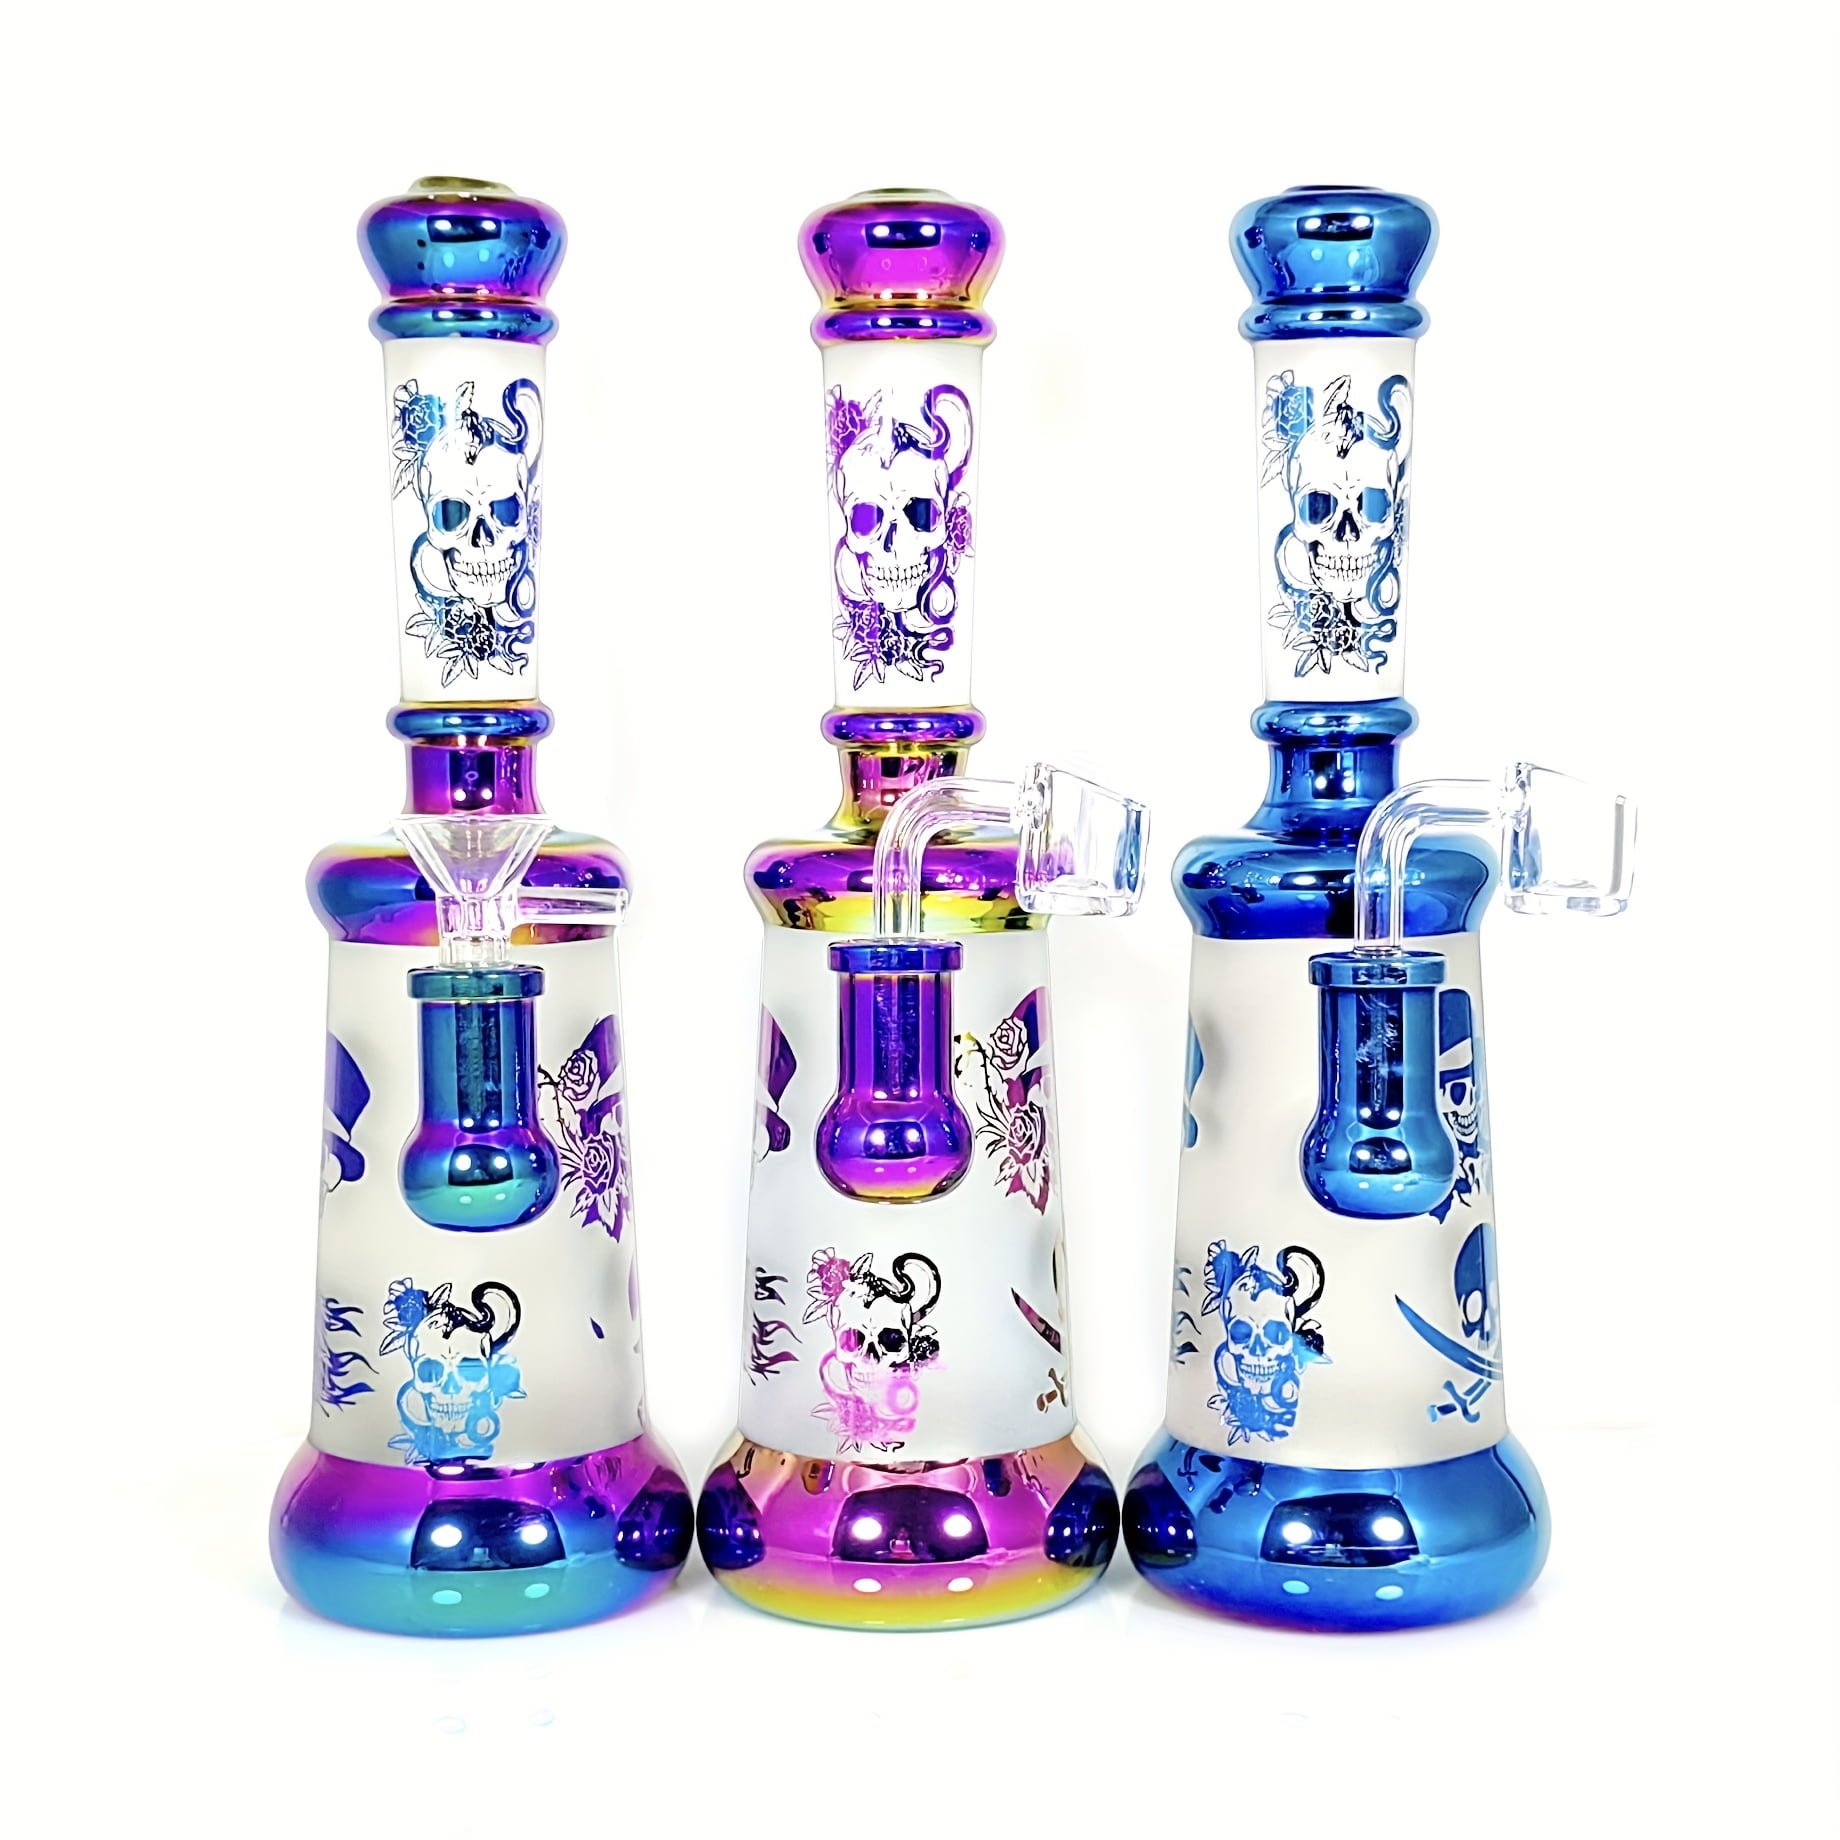 Bulk Order Wholesale Glass Bong Accessories: Small Square Tires Pot,  Hookah, Water Pipe Smoke From Yql627, $5.7